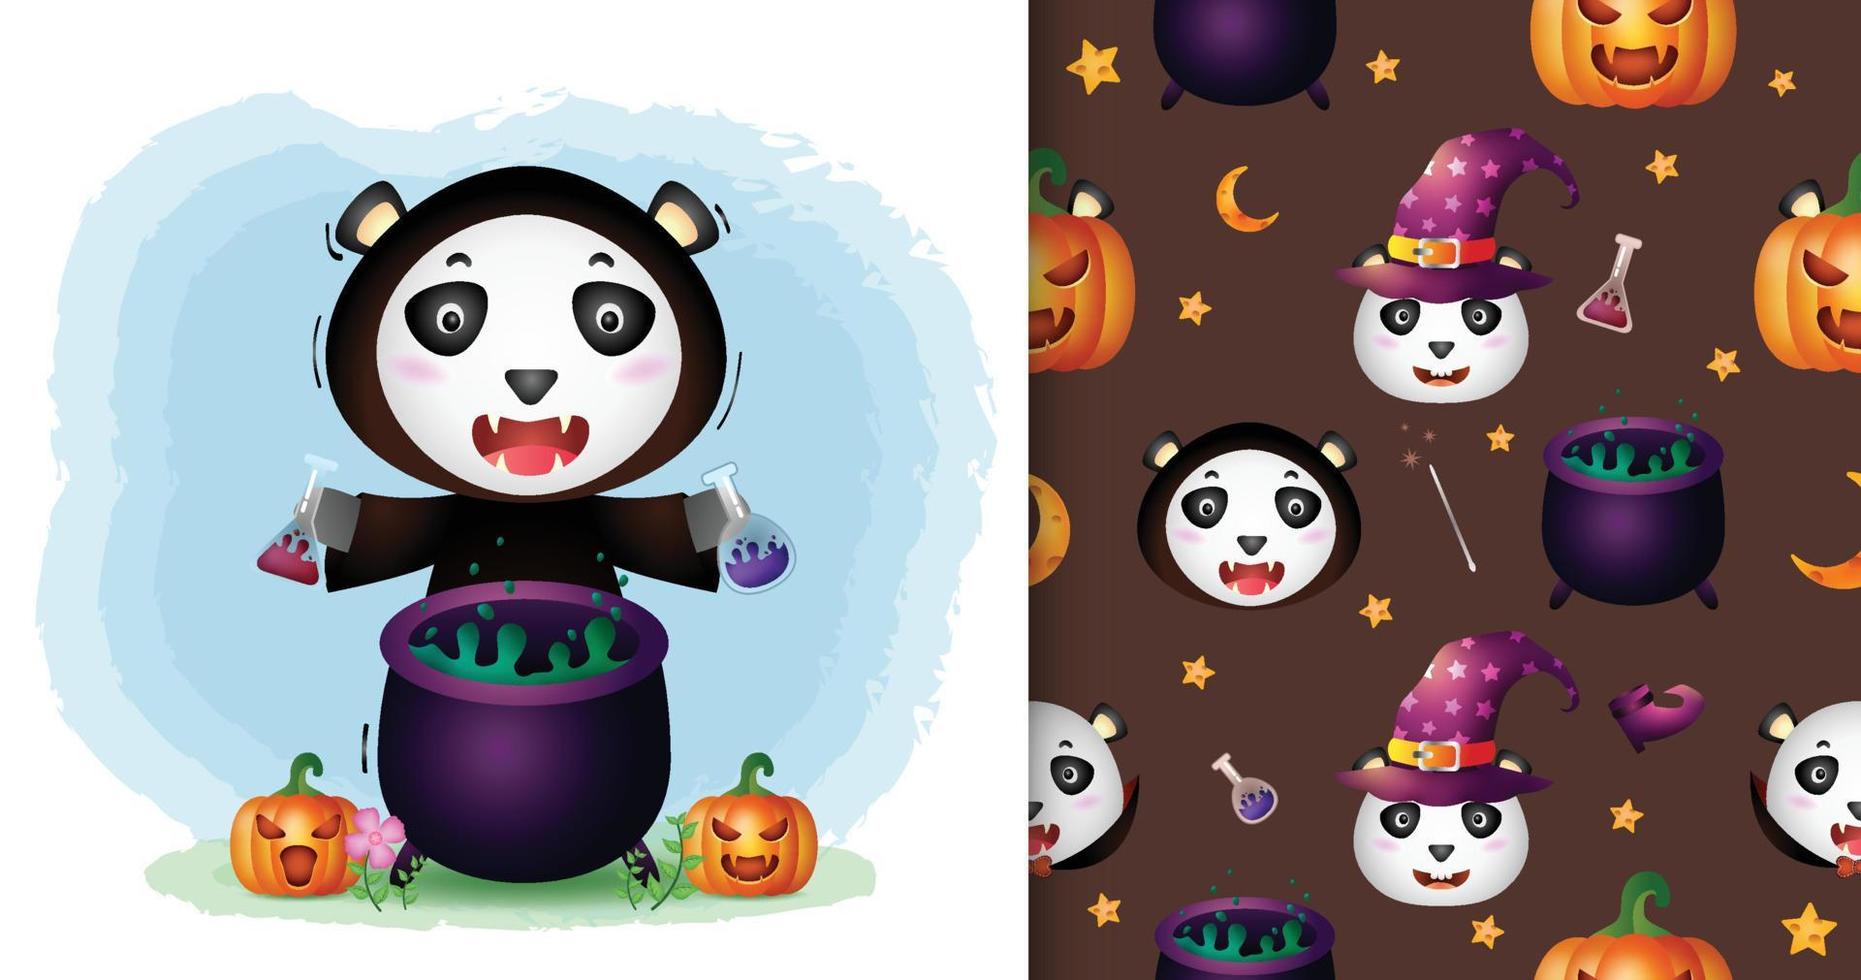 a cute panda with witch costume halloween character collection. seamless pattern and illustration designs vector